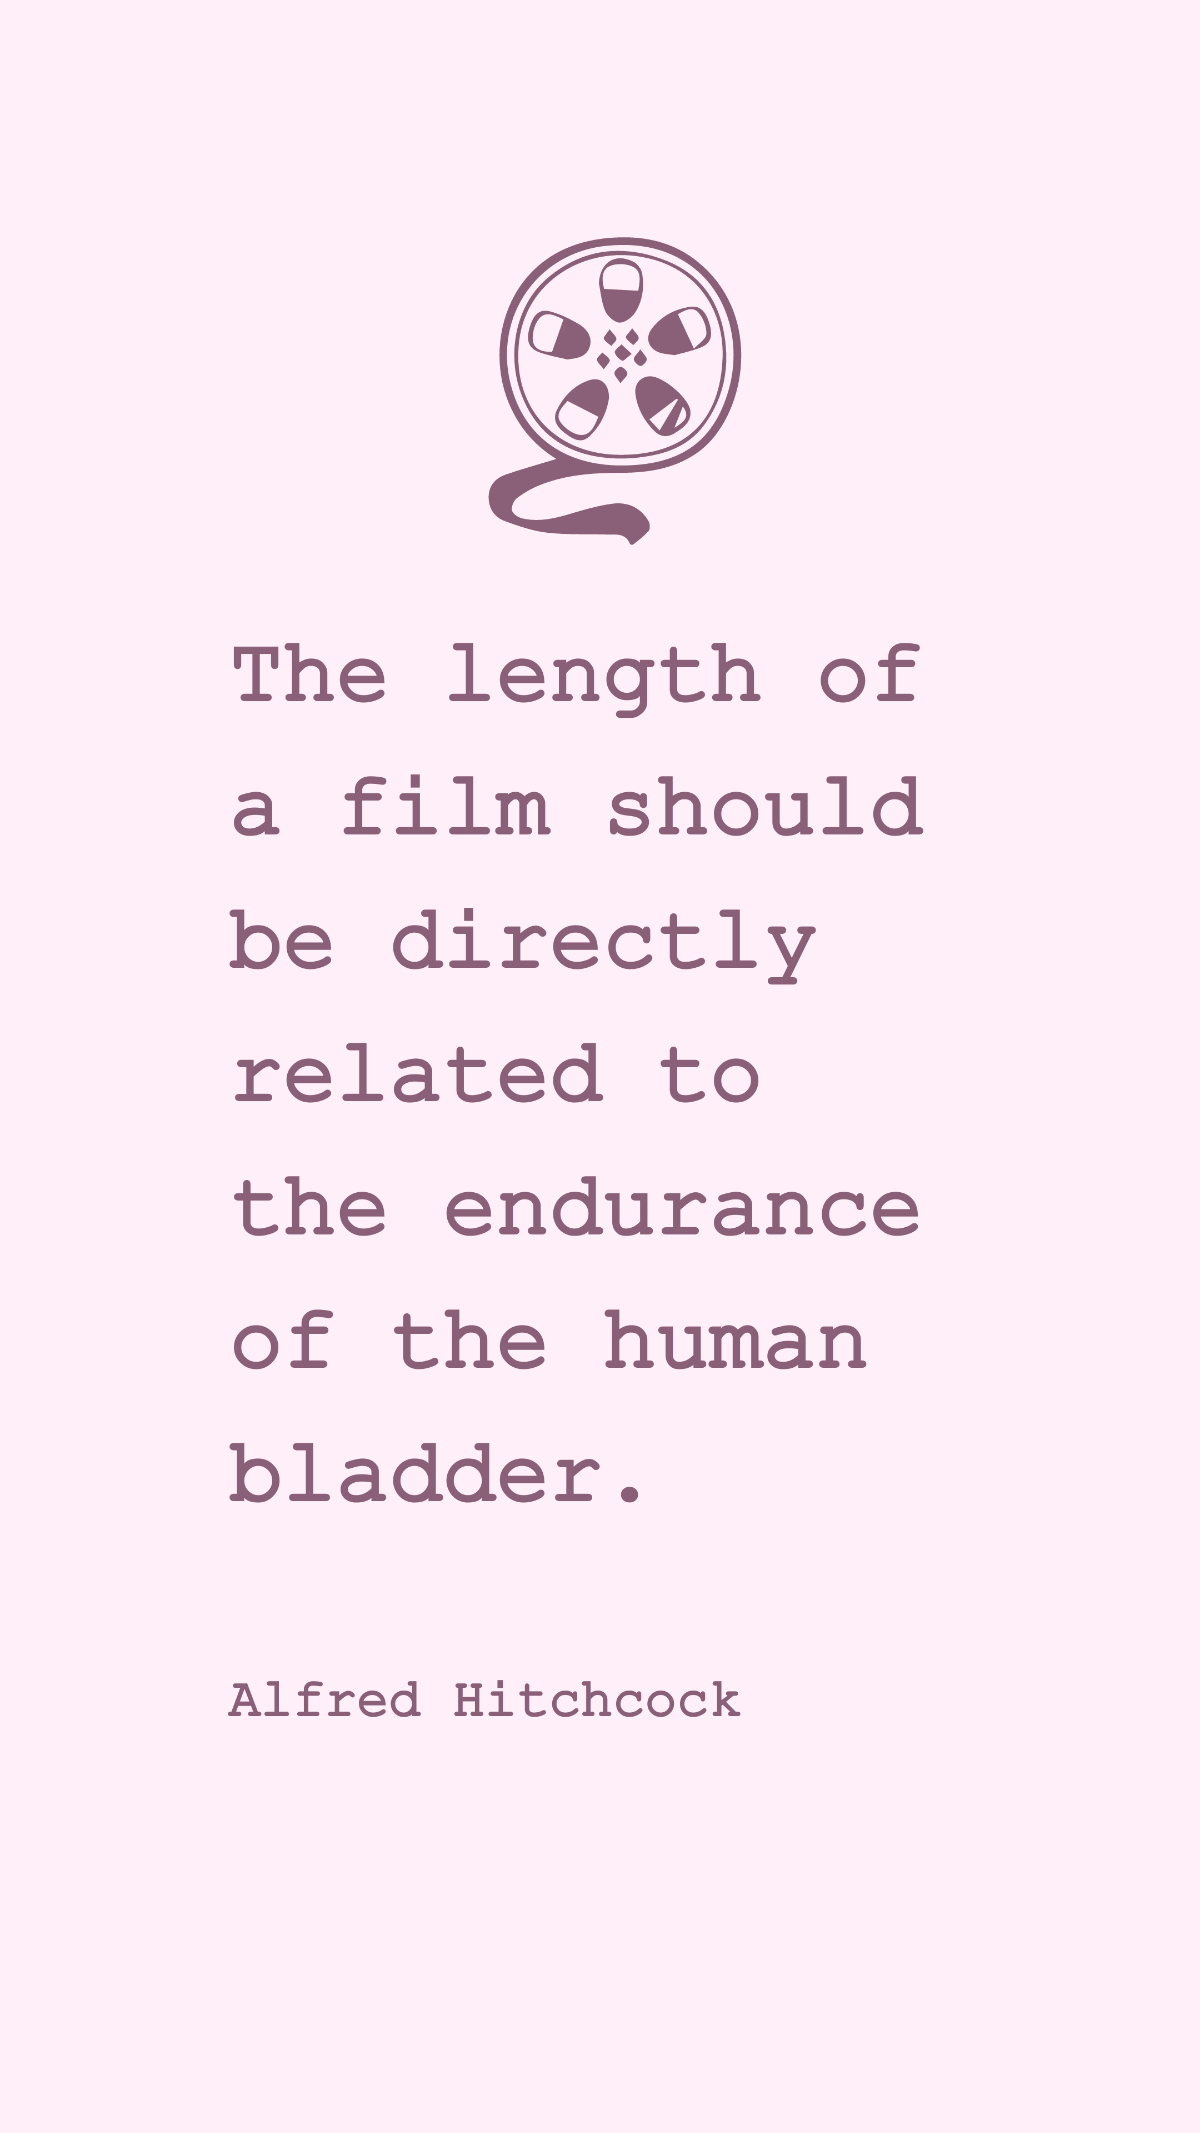 Alfred Hitchcock - The length of a film should be directly related to the endurance of the human bladder. Template